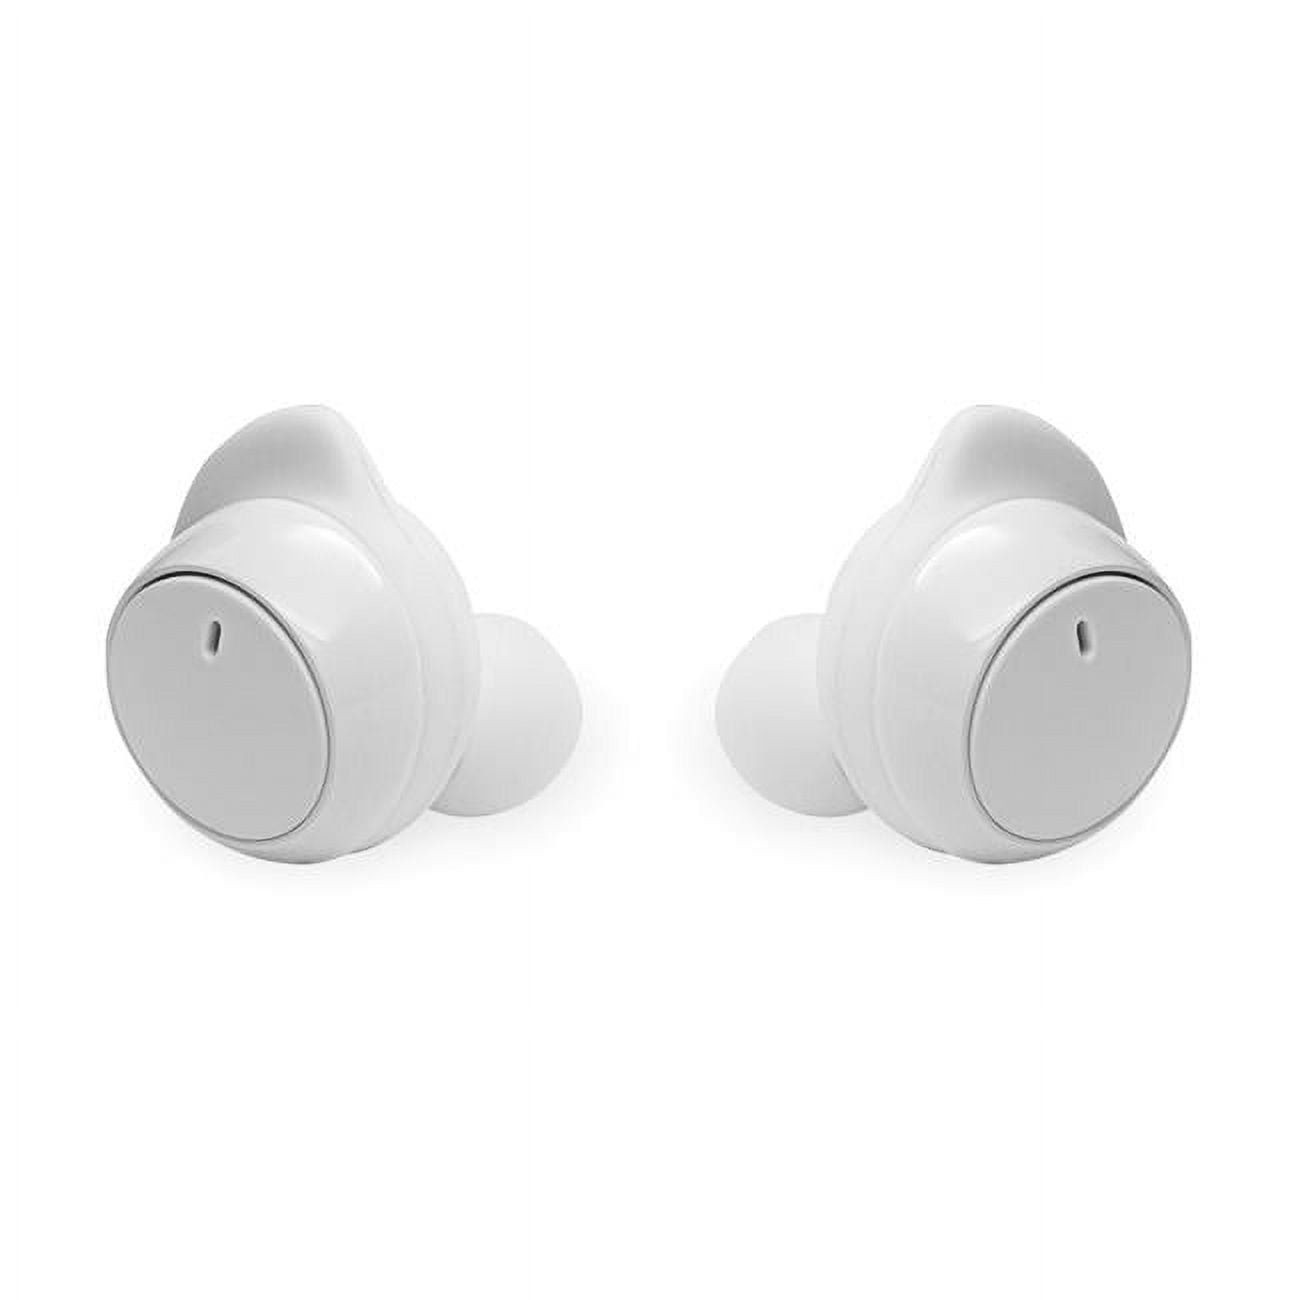 Air1 True Bluetooth Wireless Earbuds with Charging Case - White